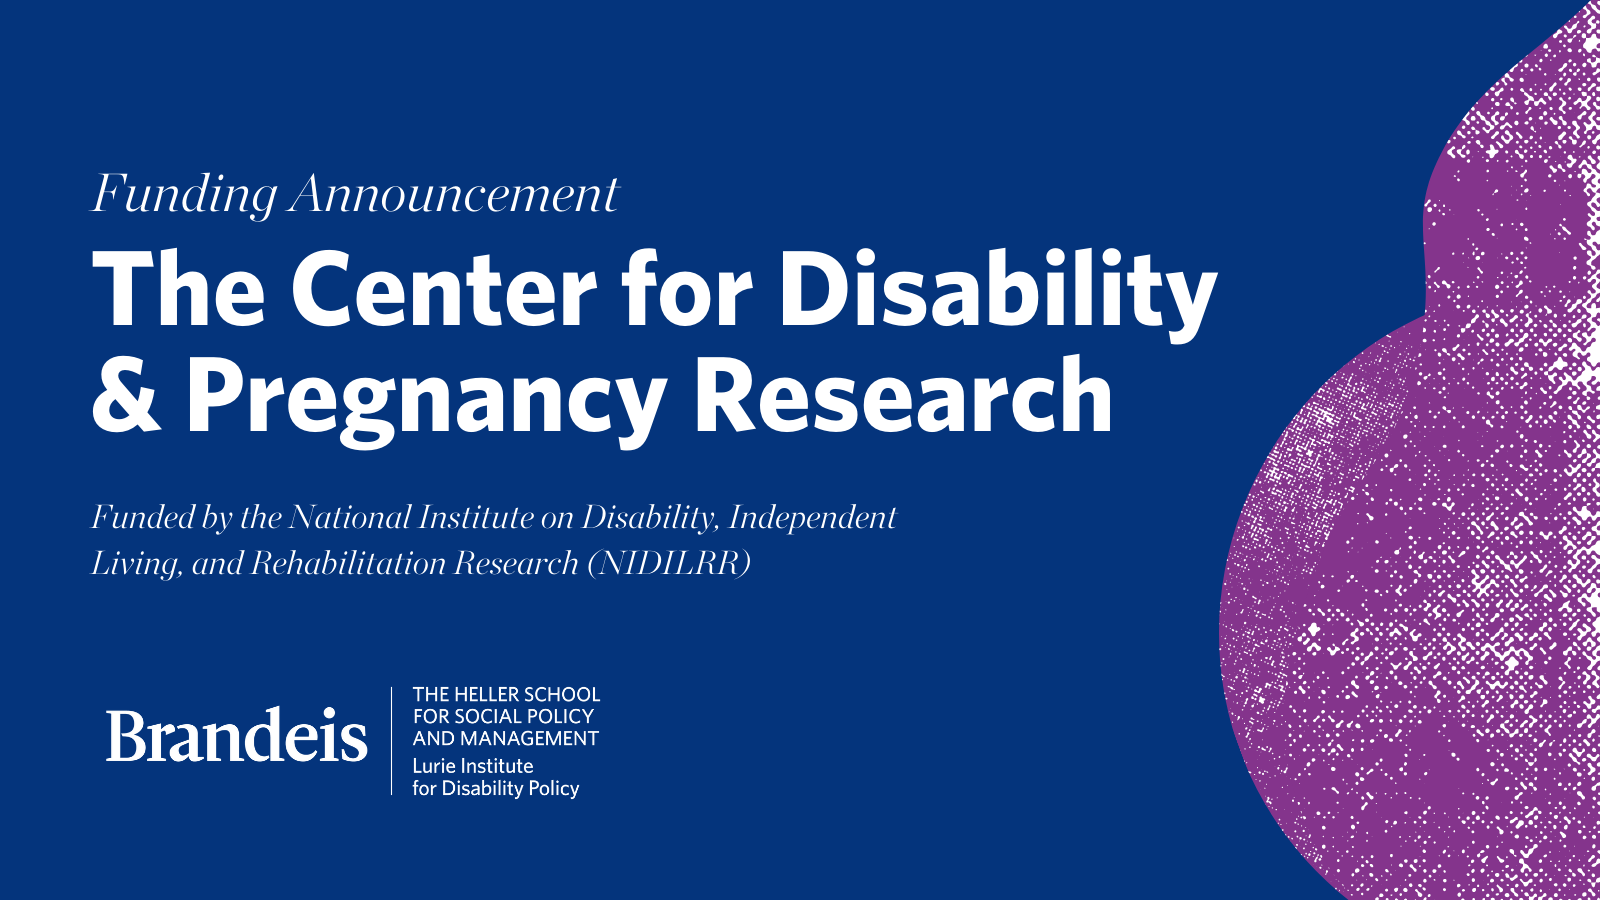 NIDILRR Grant to Support the New Center for Disability and Pregnancy Research